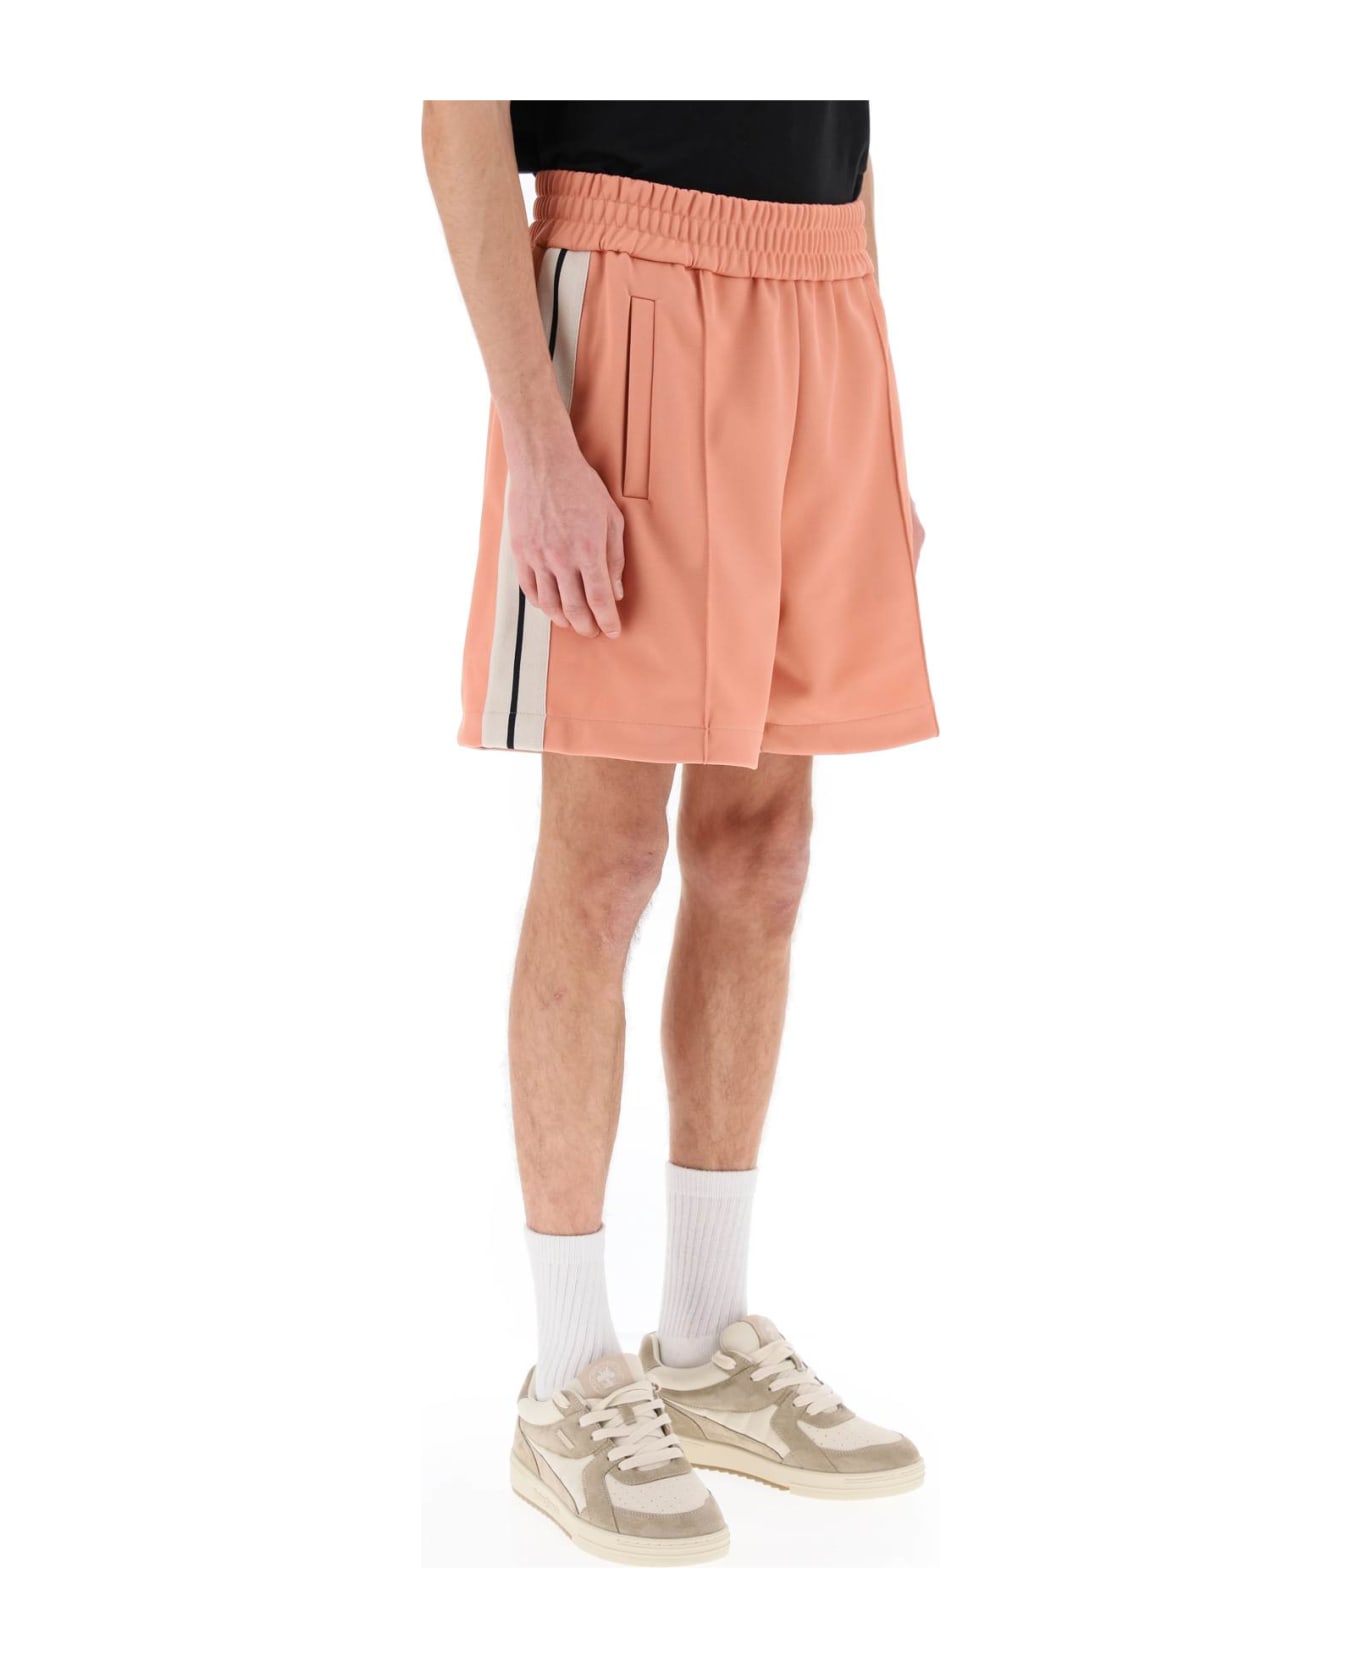 Palm Angels Sweatshorts With Side Bands - PINK BLACK (Pink) ショートパンツ